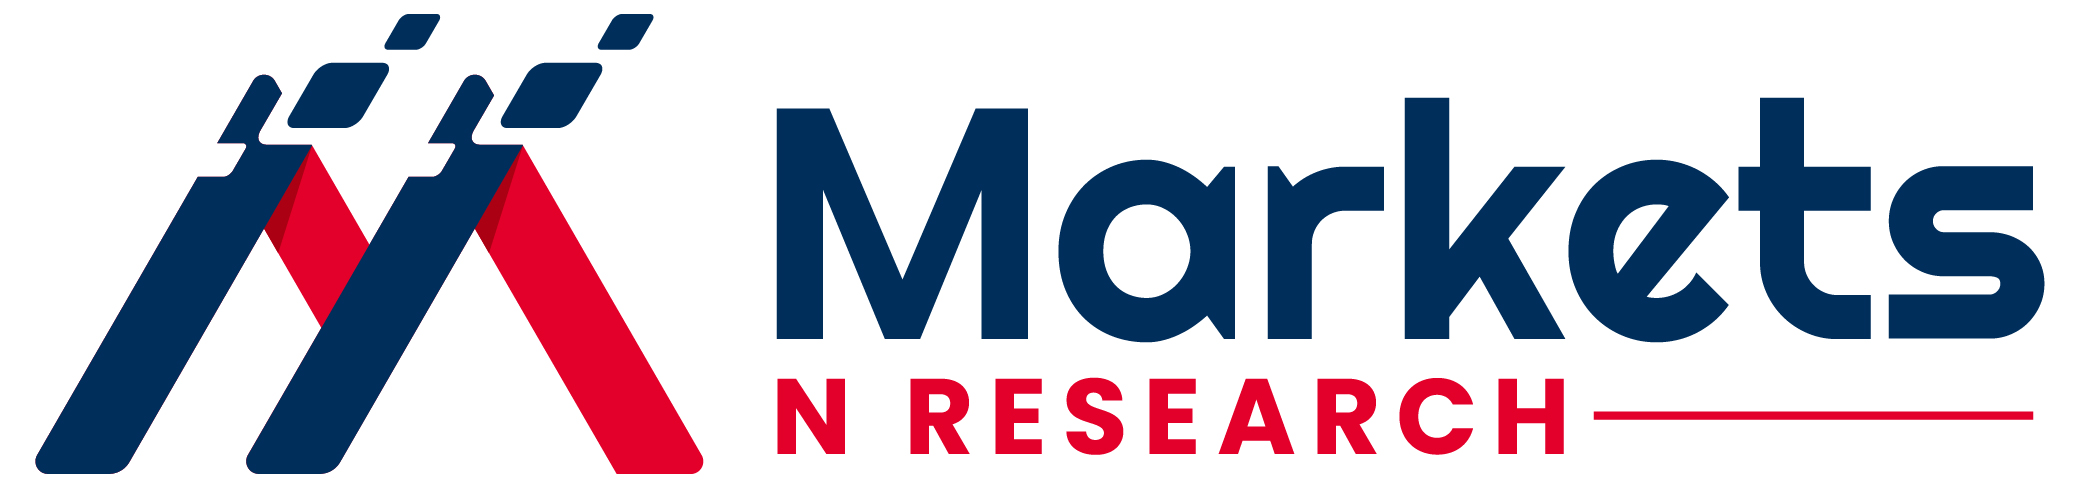 Electronic Health Record Software Market Size to Surpass USD 47.2 Million with Growing CAGR of 7.50% by 2030, Emerging Trends, Business Strategies, Competitive Landscape and Regional Analysis